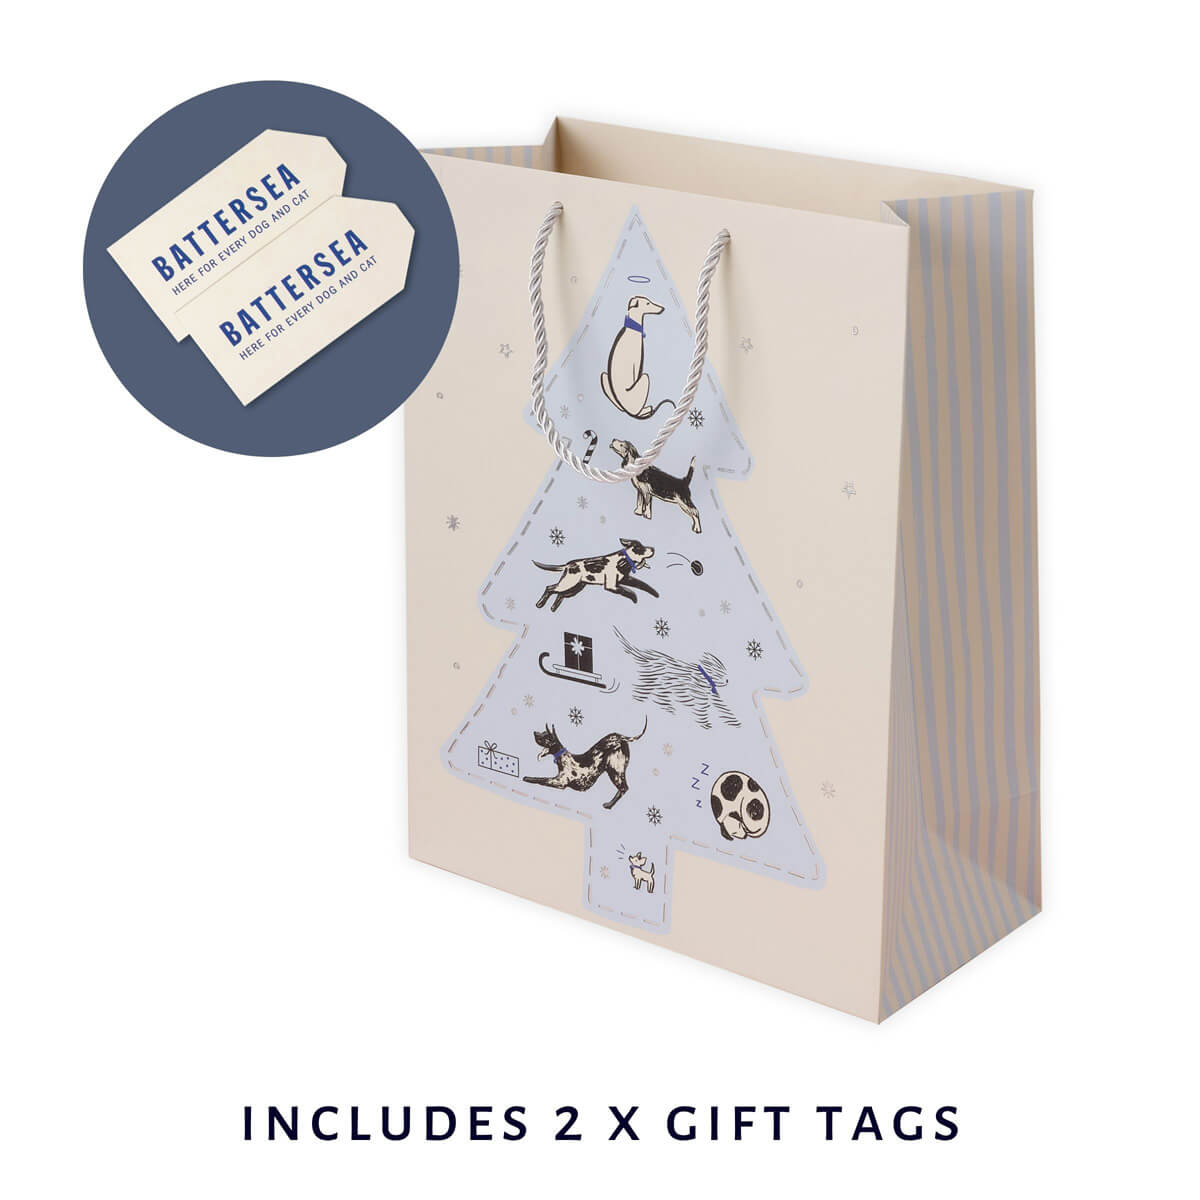 Battersea Dogs & Cats Home Charity Christmas Gift Bag For Dog Lovers - Close up image of christmas gift bag showing black and white illustrations of dogs within a sky blue christmas tree illustration